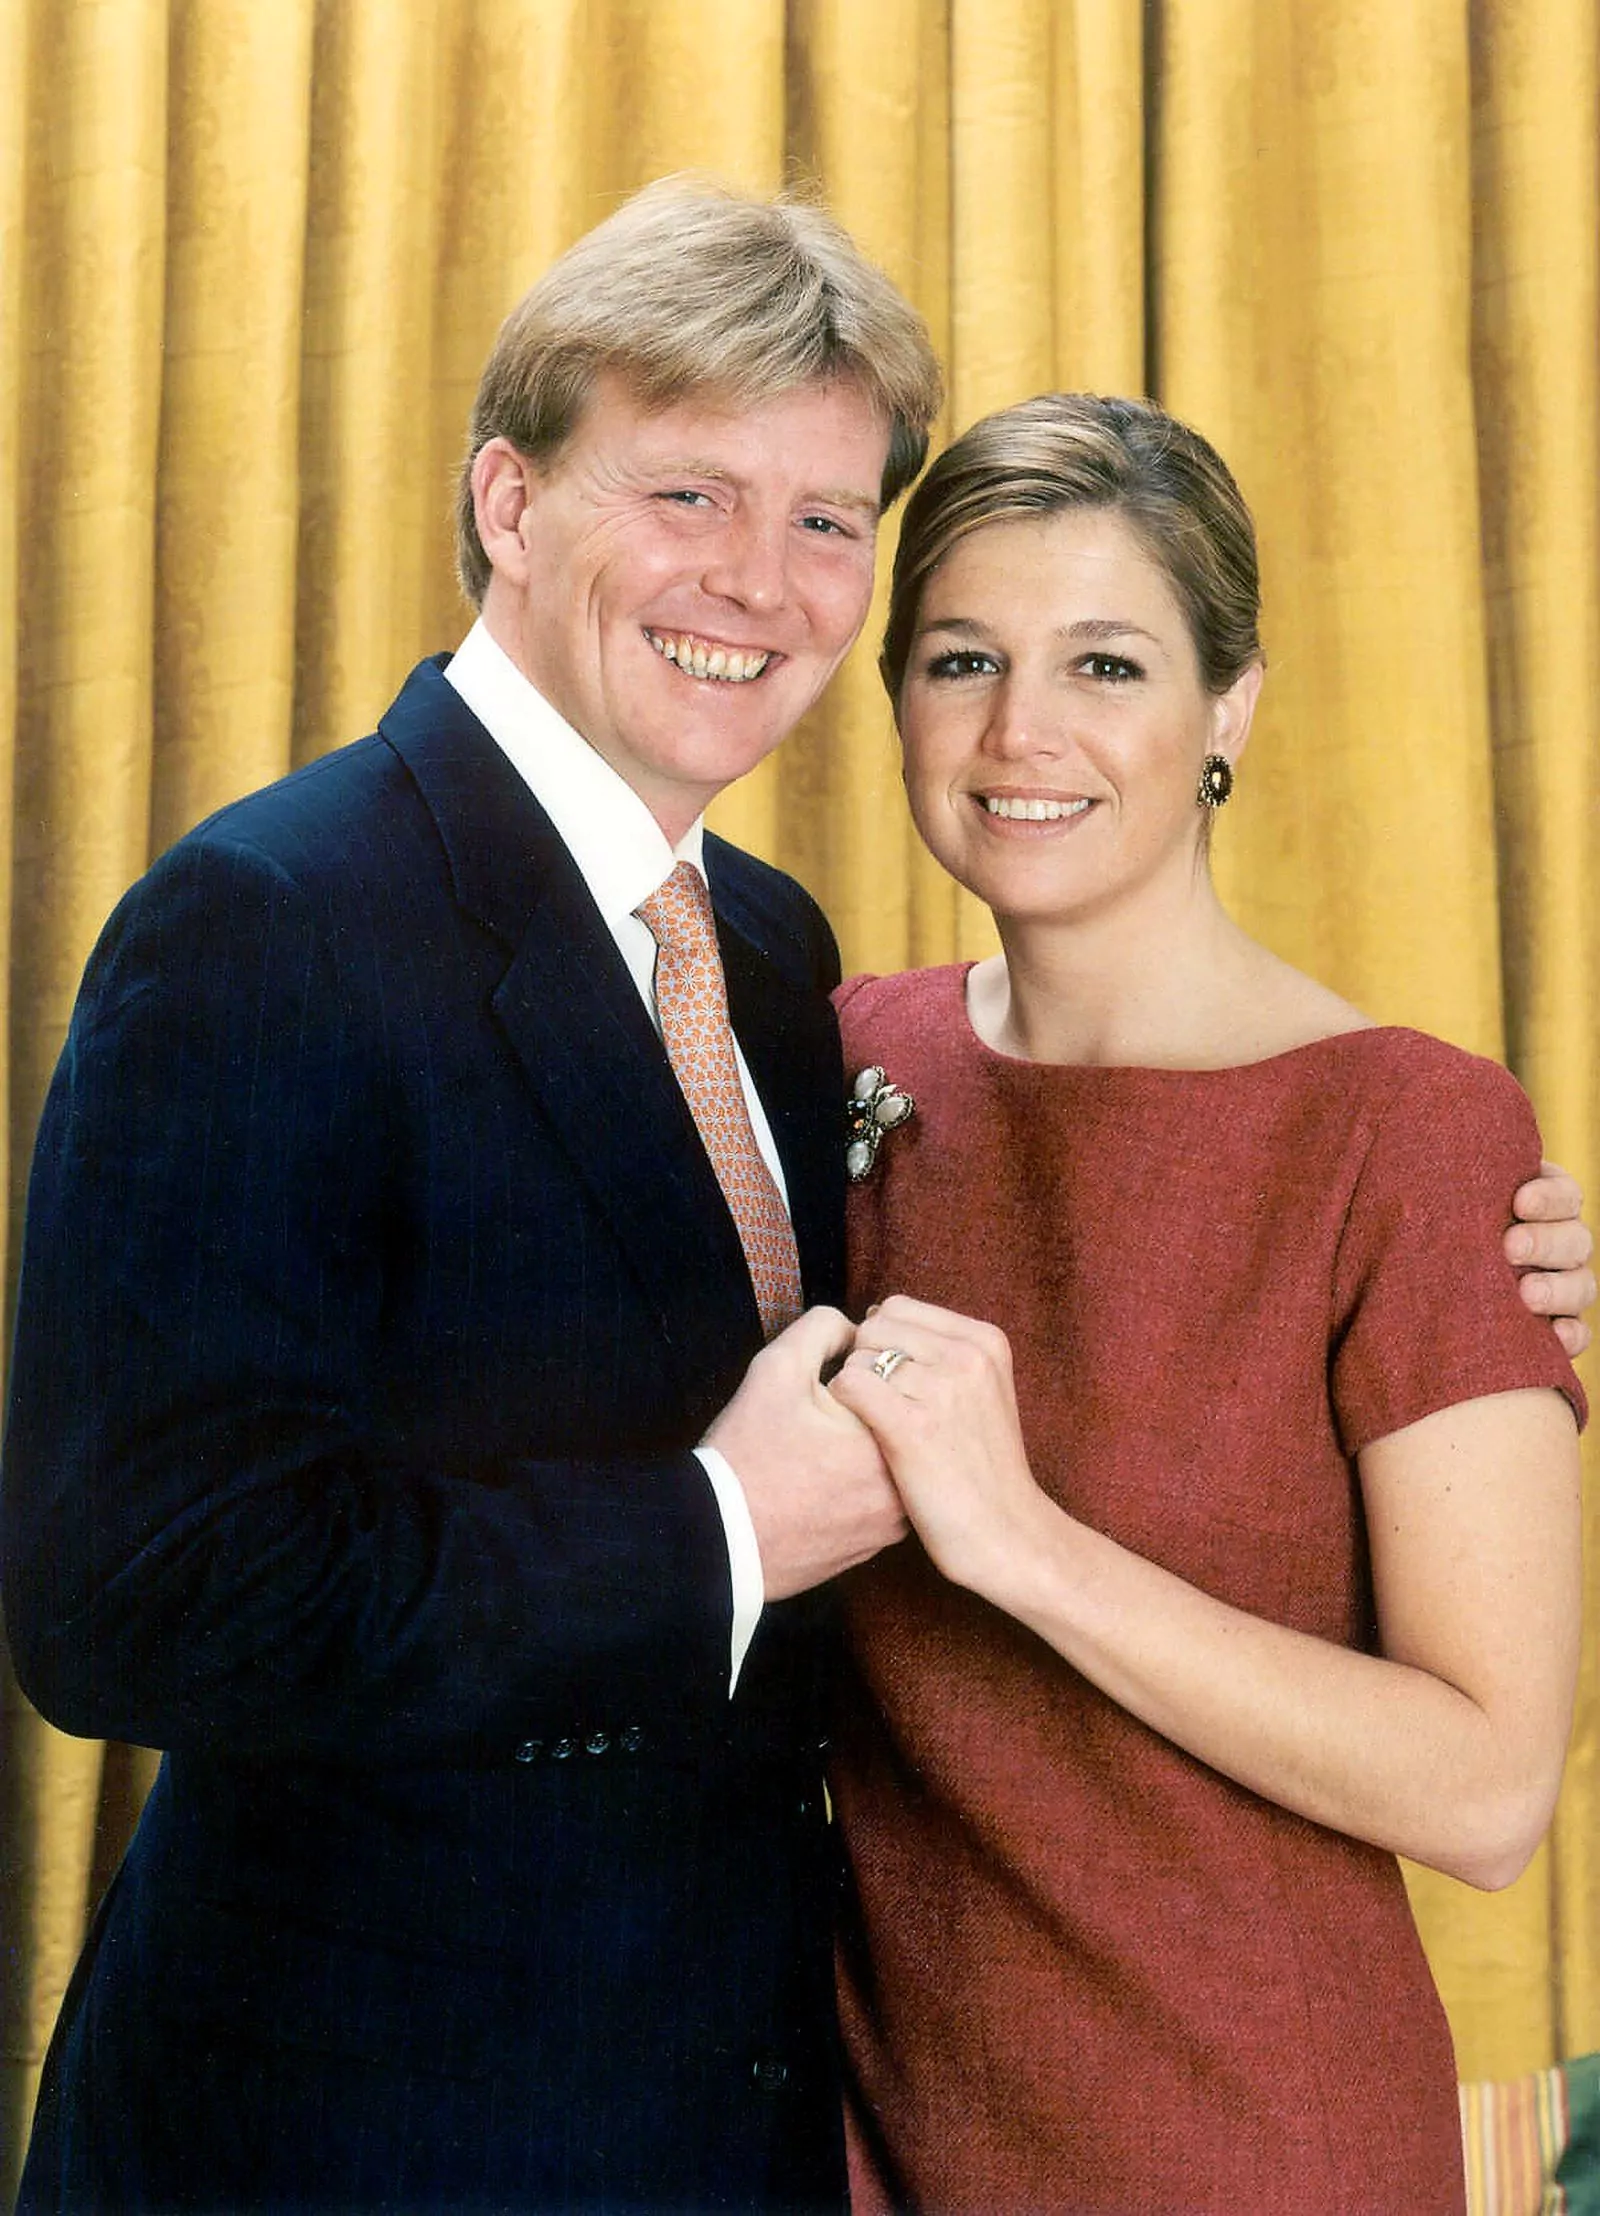 Prince Willem-Alexander and Maxima Zorreguieta at the ceremony announcing their engagement, 30 March 2001.